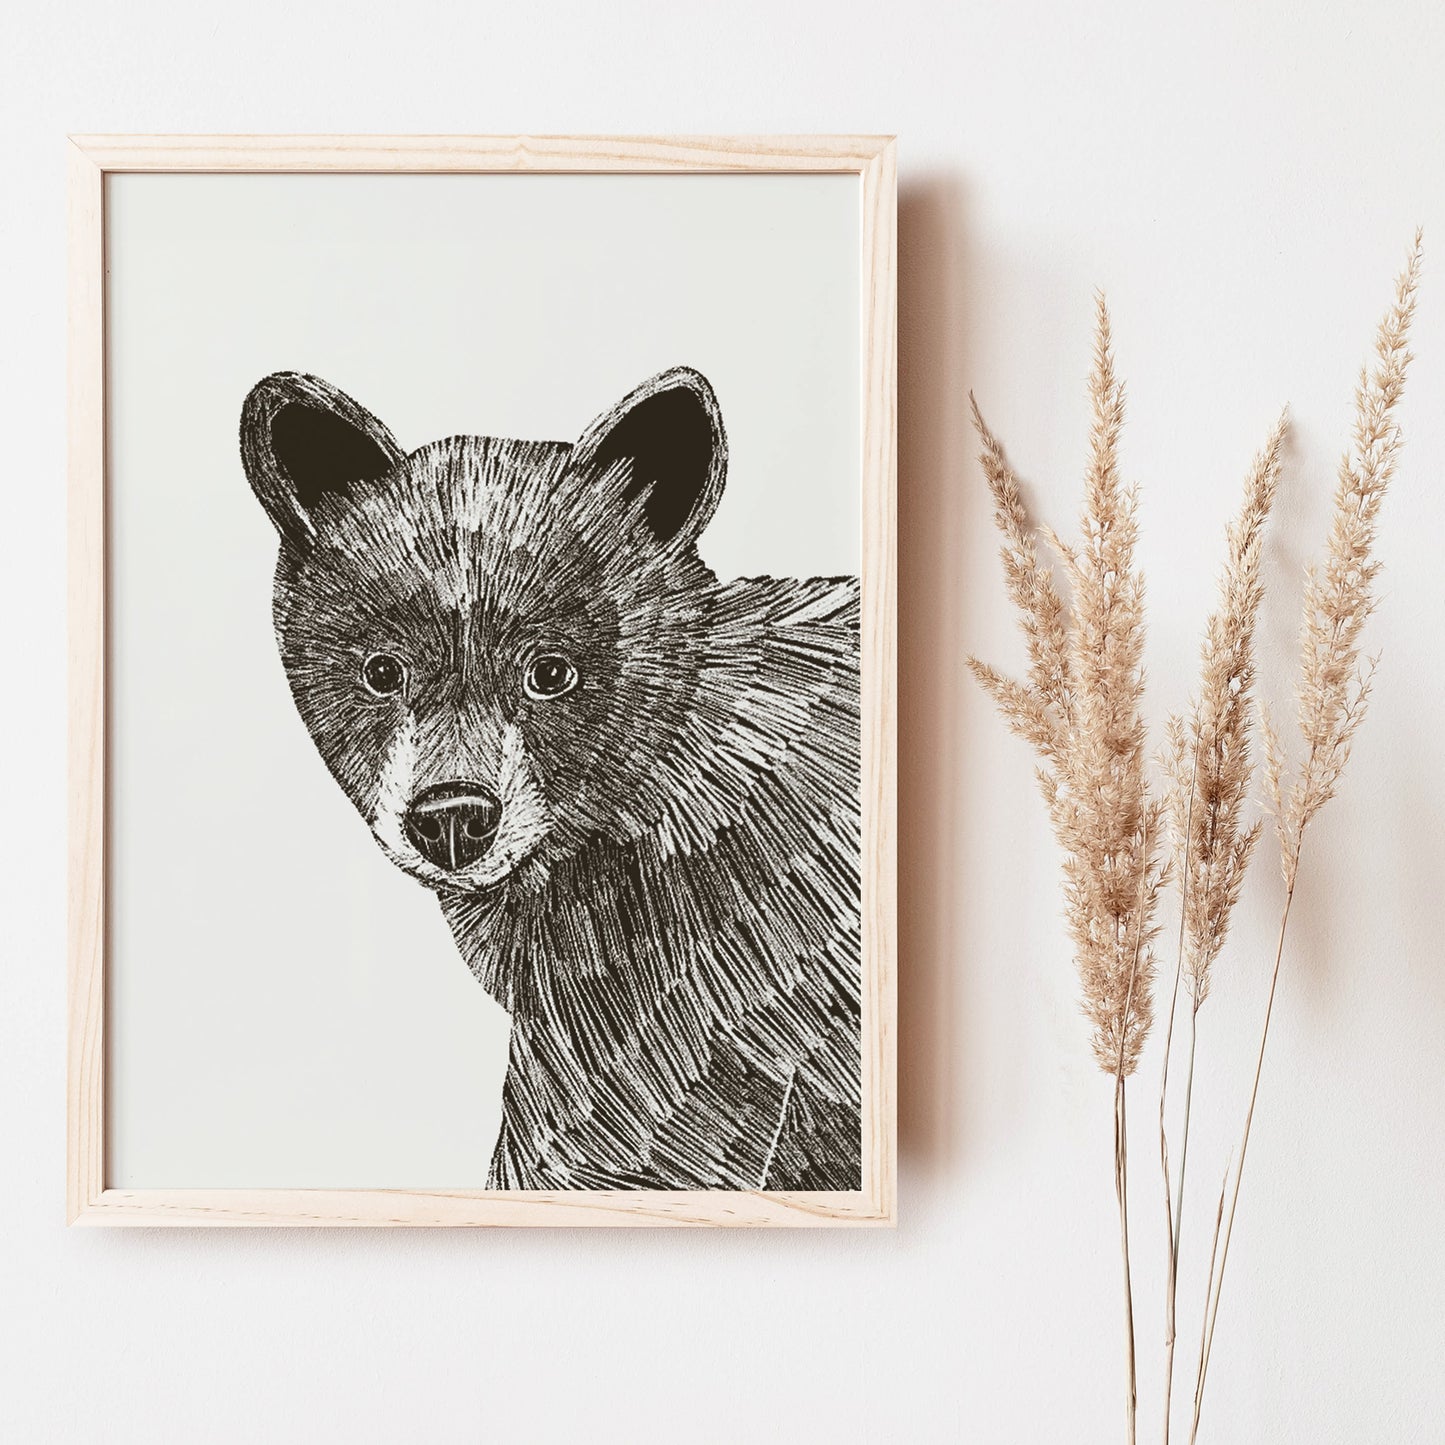 Bear art print for nursery or kids room featured in timelines and traditional black and white.